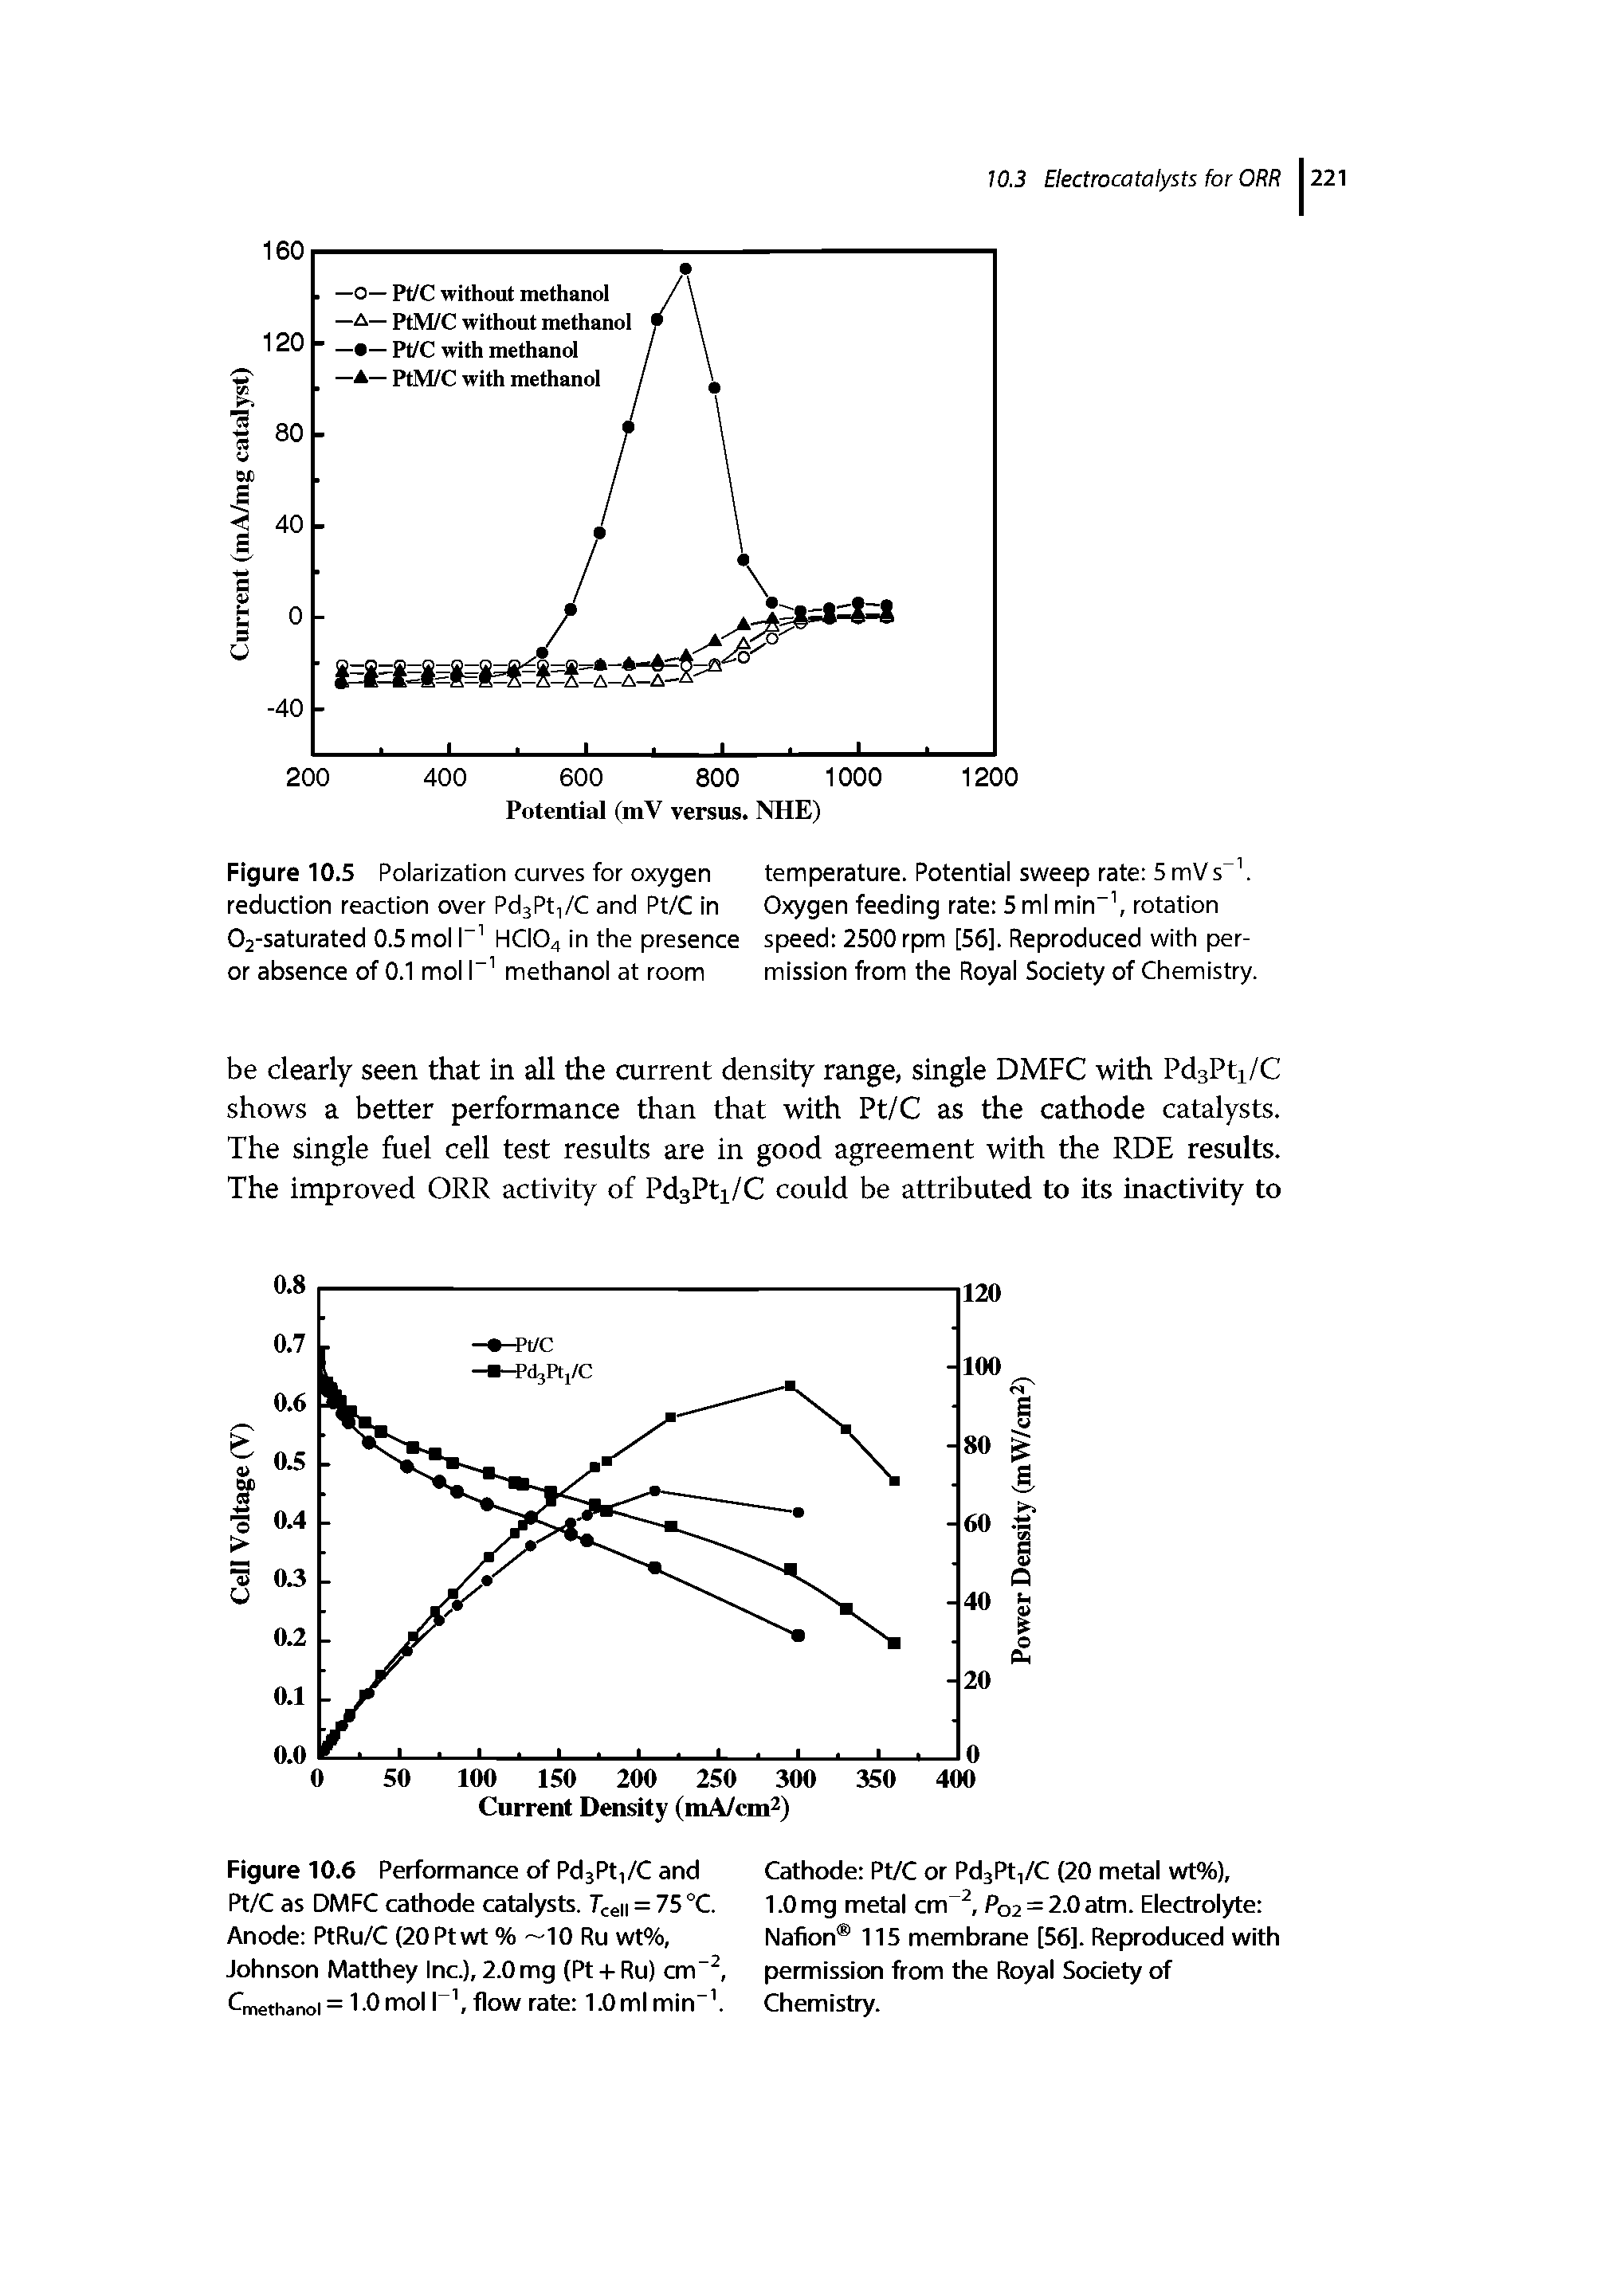 Figure 10.5 Polarization curves for oxygen reduction reaction over Pd3Pt,/C and Pt/C in 02-saturated 0.5 mol I" HCIO4 in the presence or absence of 0.1 mol I" methanol at room...